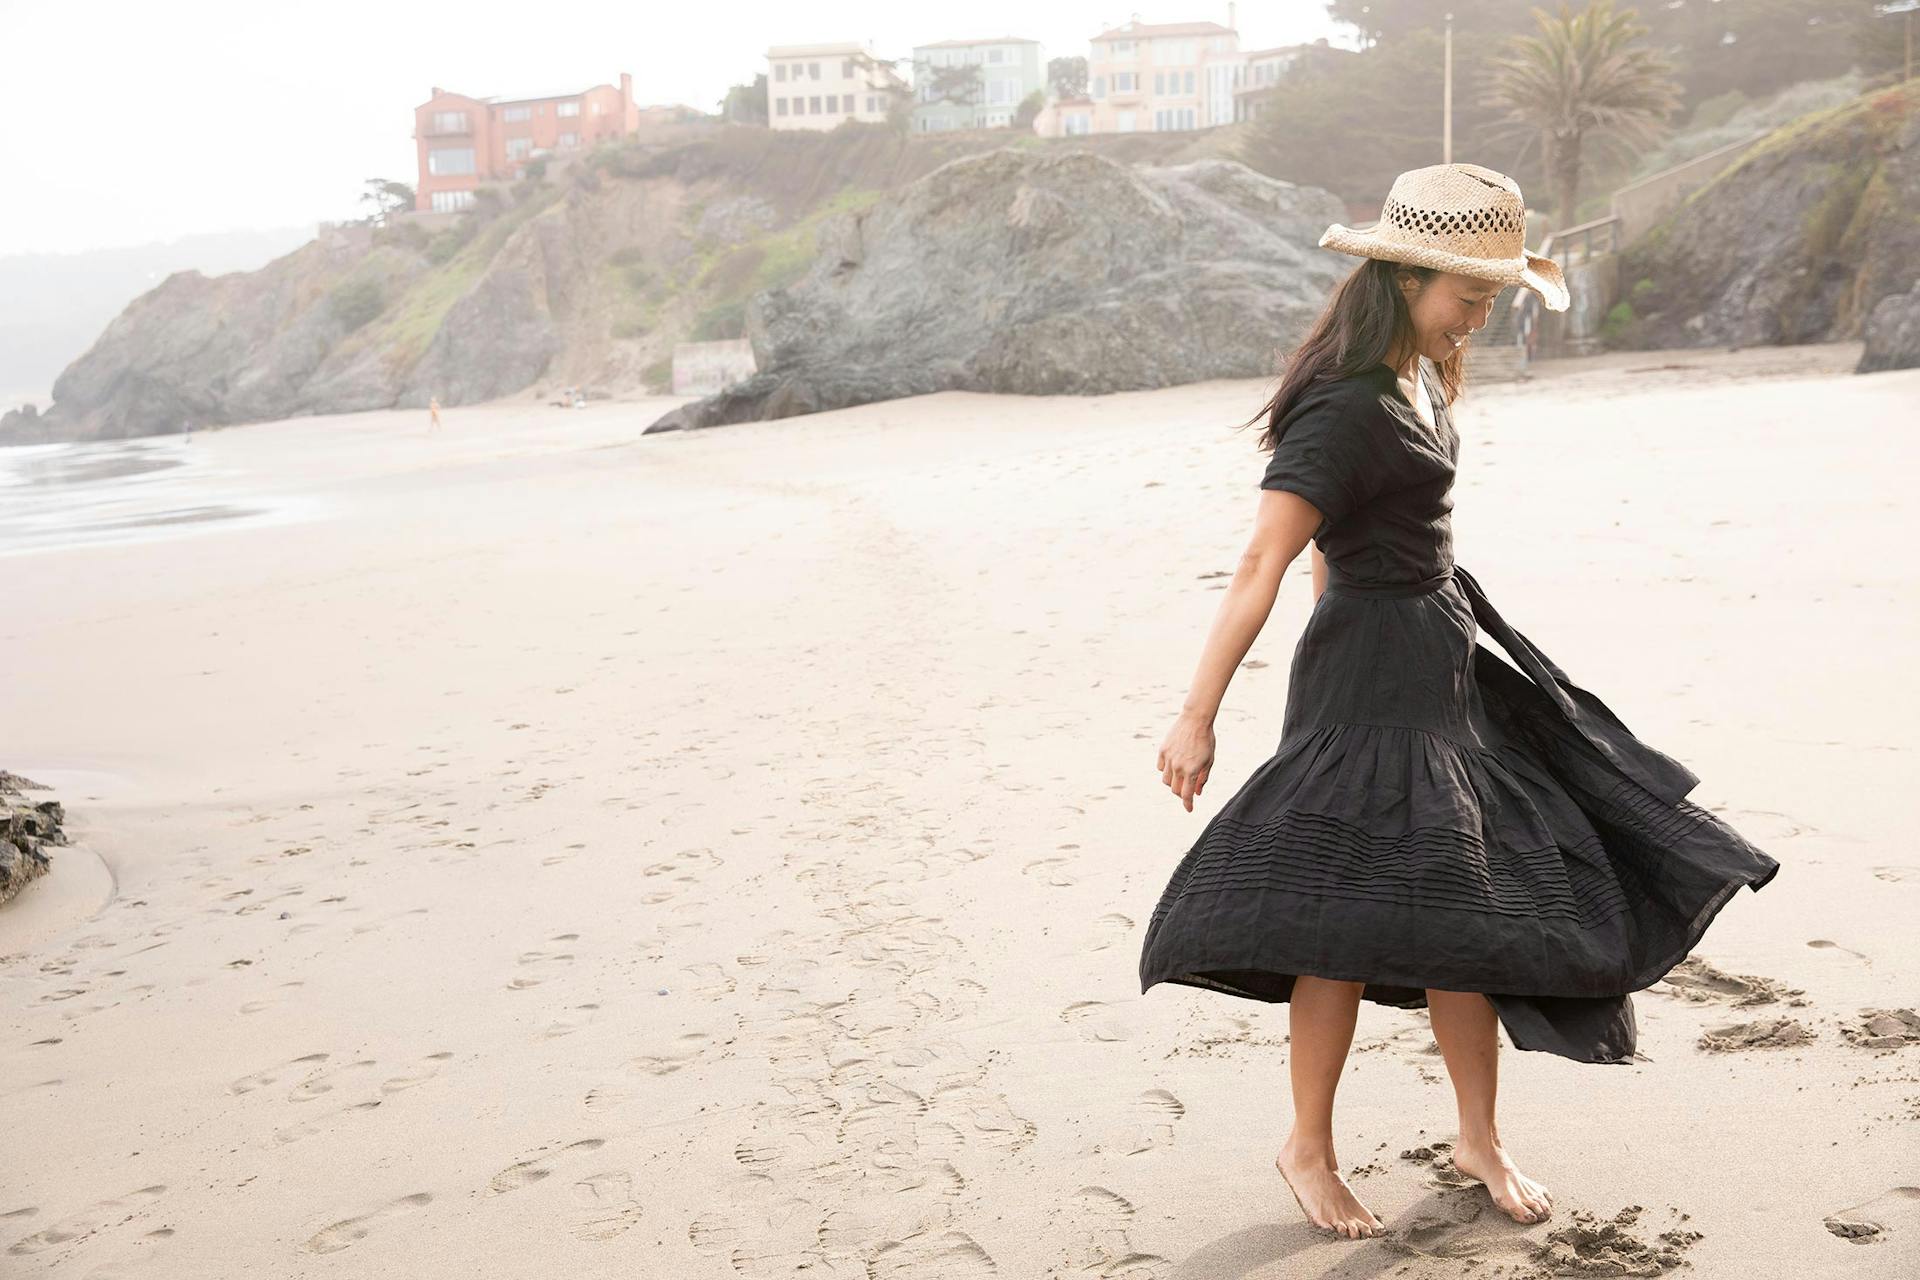 Bonnie Tsui wears a black dress and stands on the beach